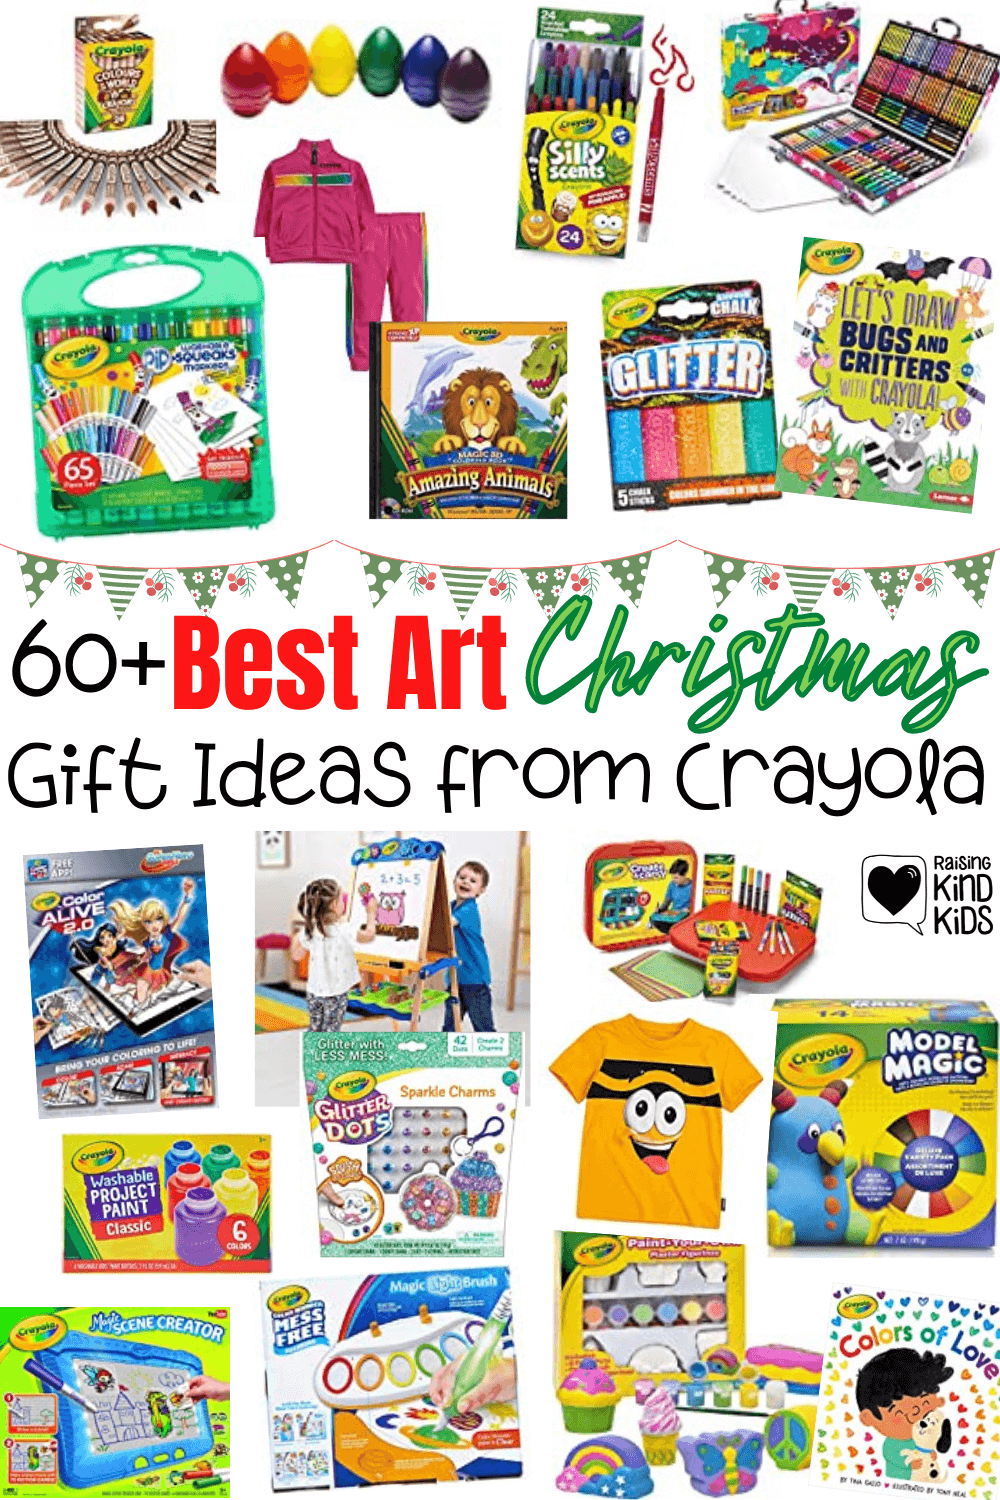 Use these 60+ art gifts for kids from Crayola that are perfect for artistic and creative kids or if you want to inspire kids to create more art.